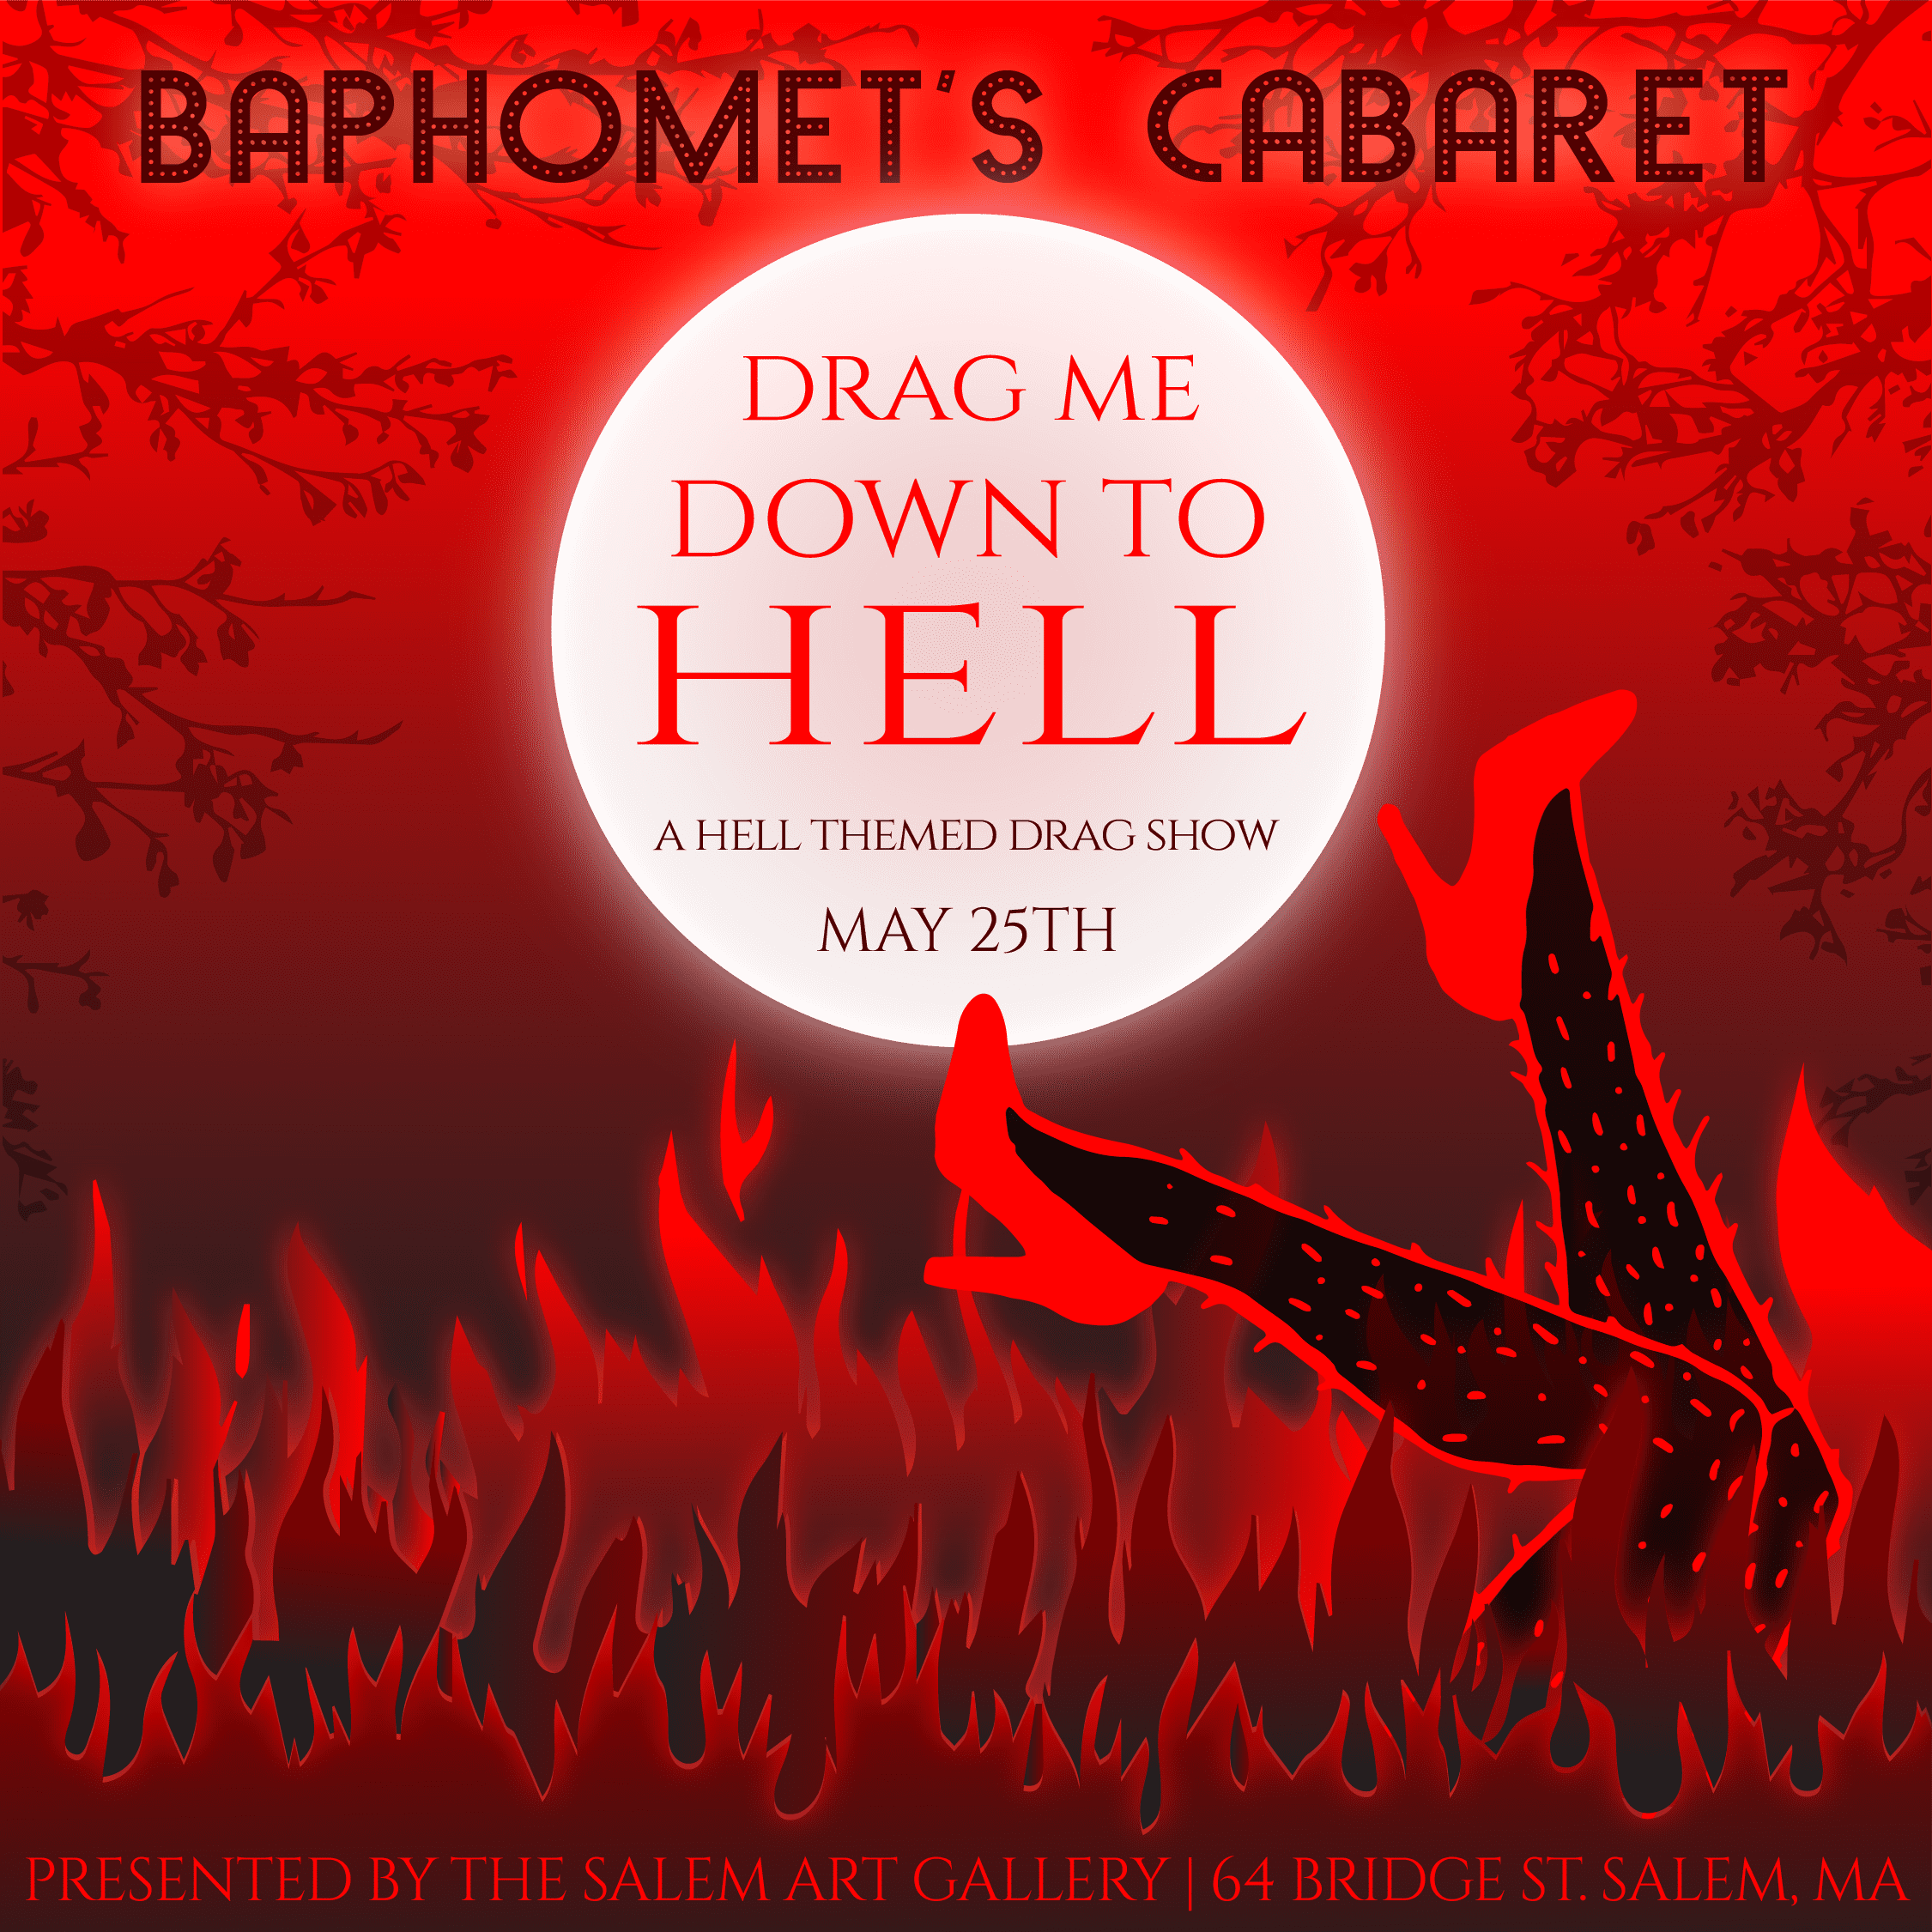 Get ready for "Drag Me Down to Hell," an exciting themed drag show happening on May 25th at the Salem Art Gallery. Our promotional poster is crafted with striking red and black flame imagery, incorporated with intriguing bat-like shapes. Be sure not to miss this mesmerizing evening!